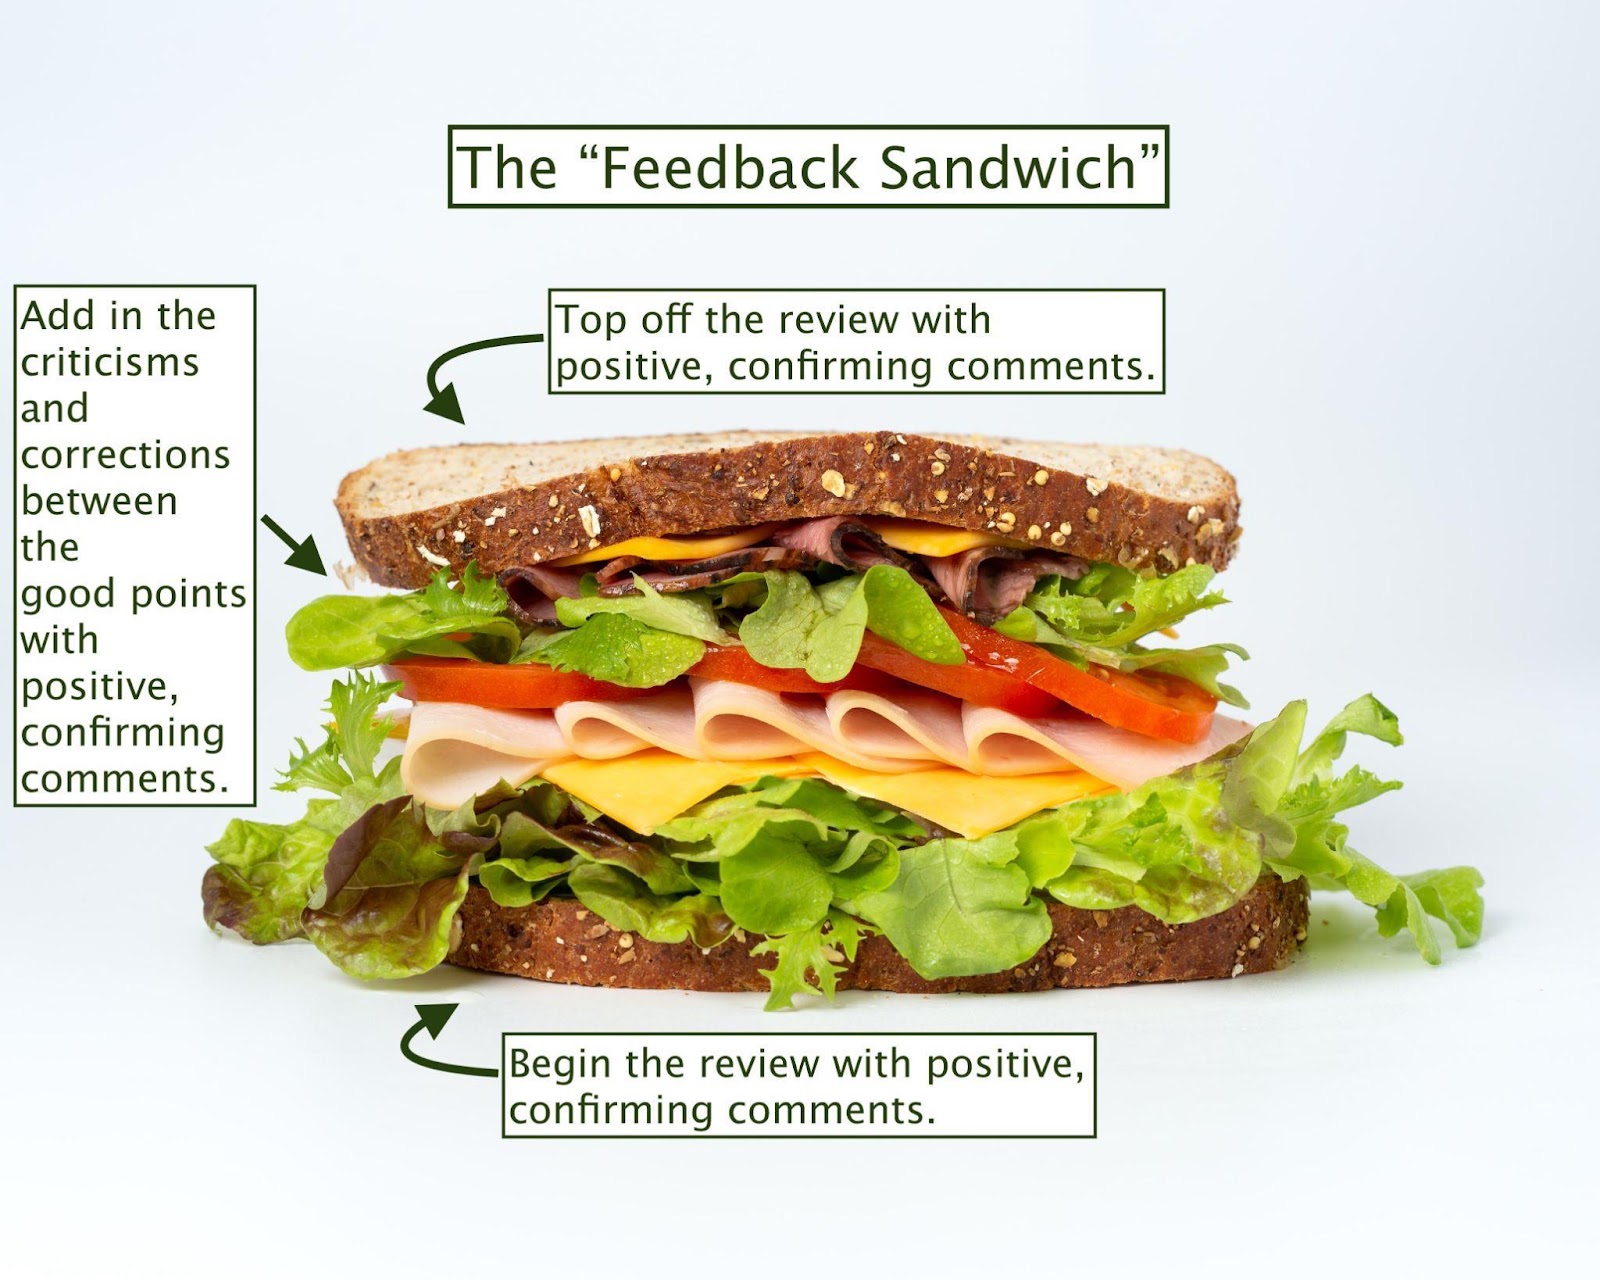 A sandwich showing how to provide feedback by sandwichin” criticisms and corrections between confirming comments.